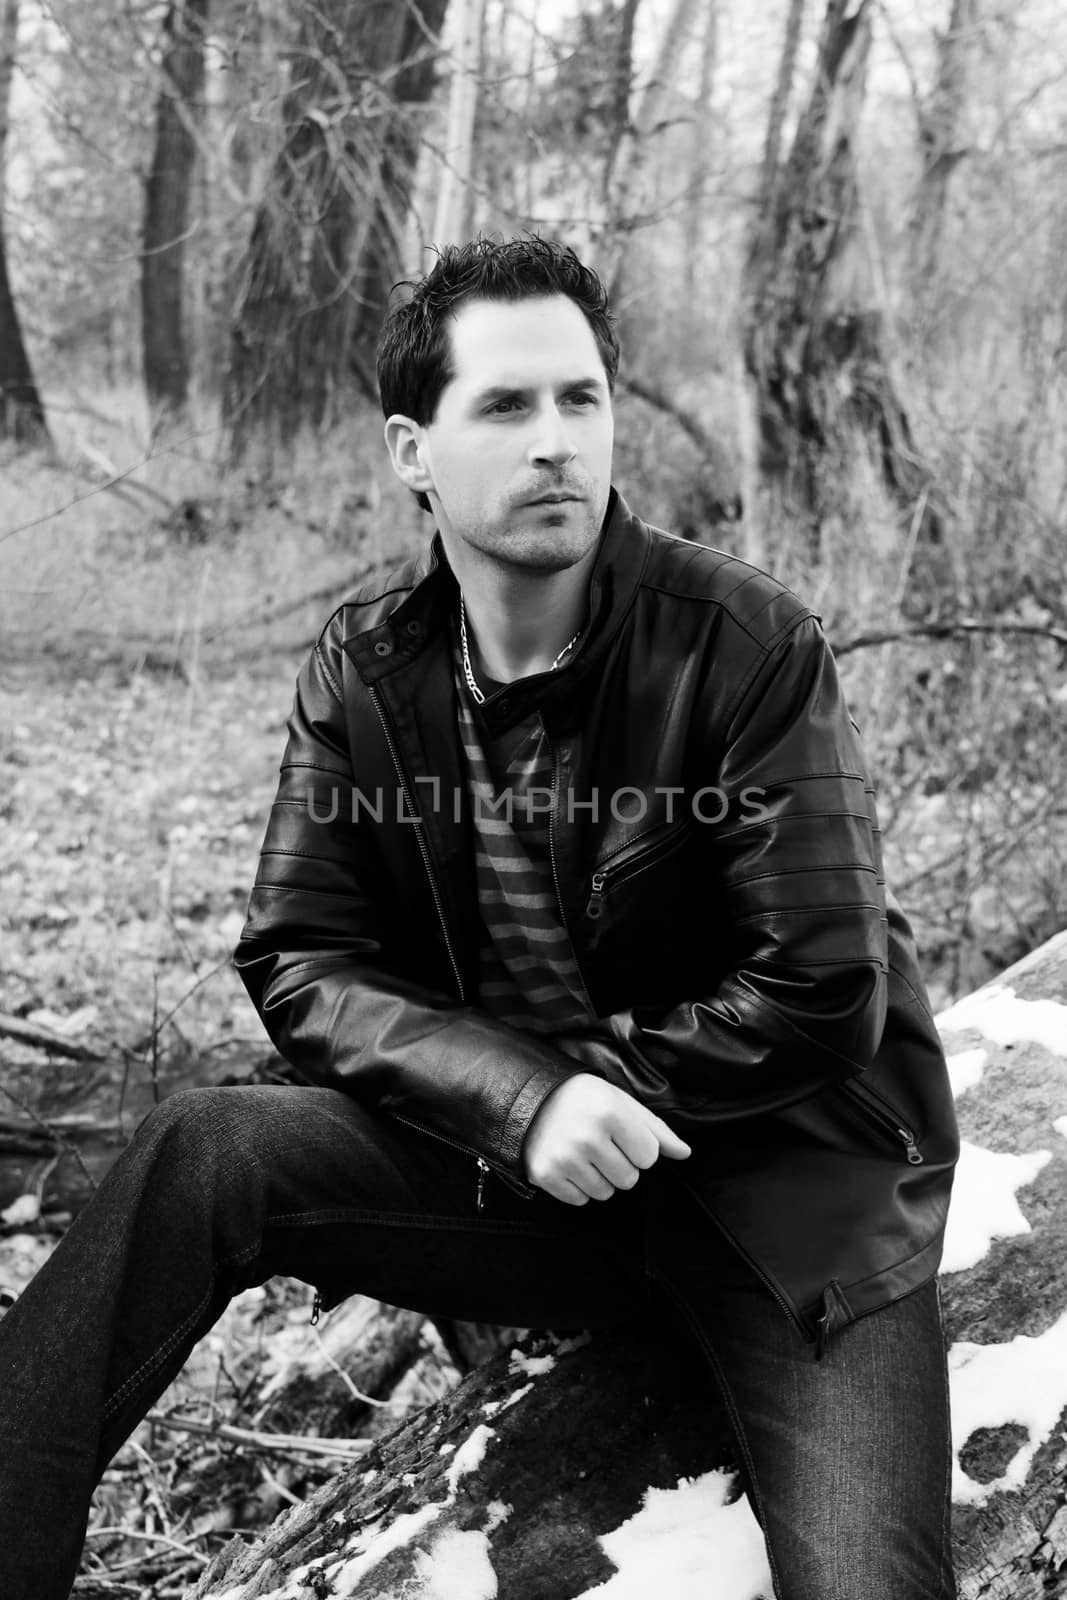 Brunette male model outdoors wearing leather jacket and jeans